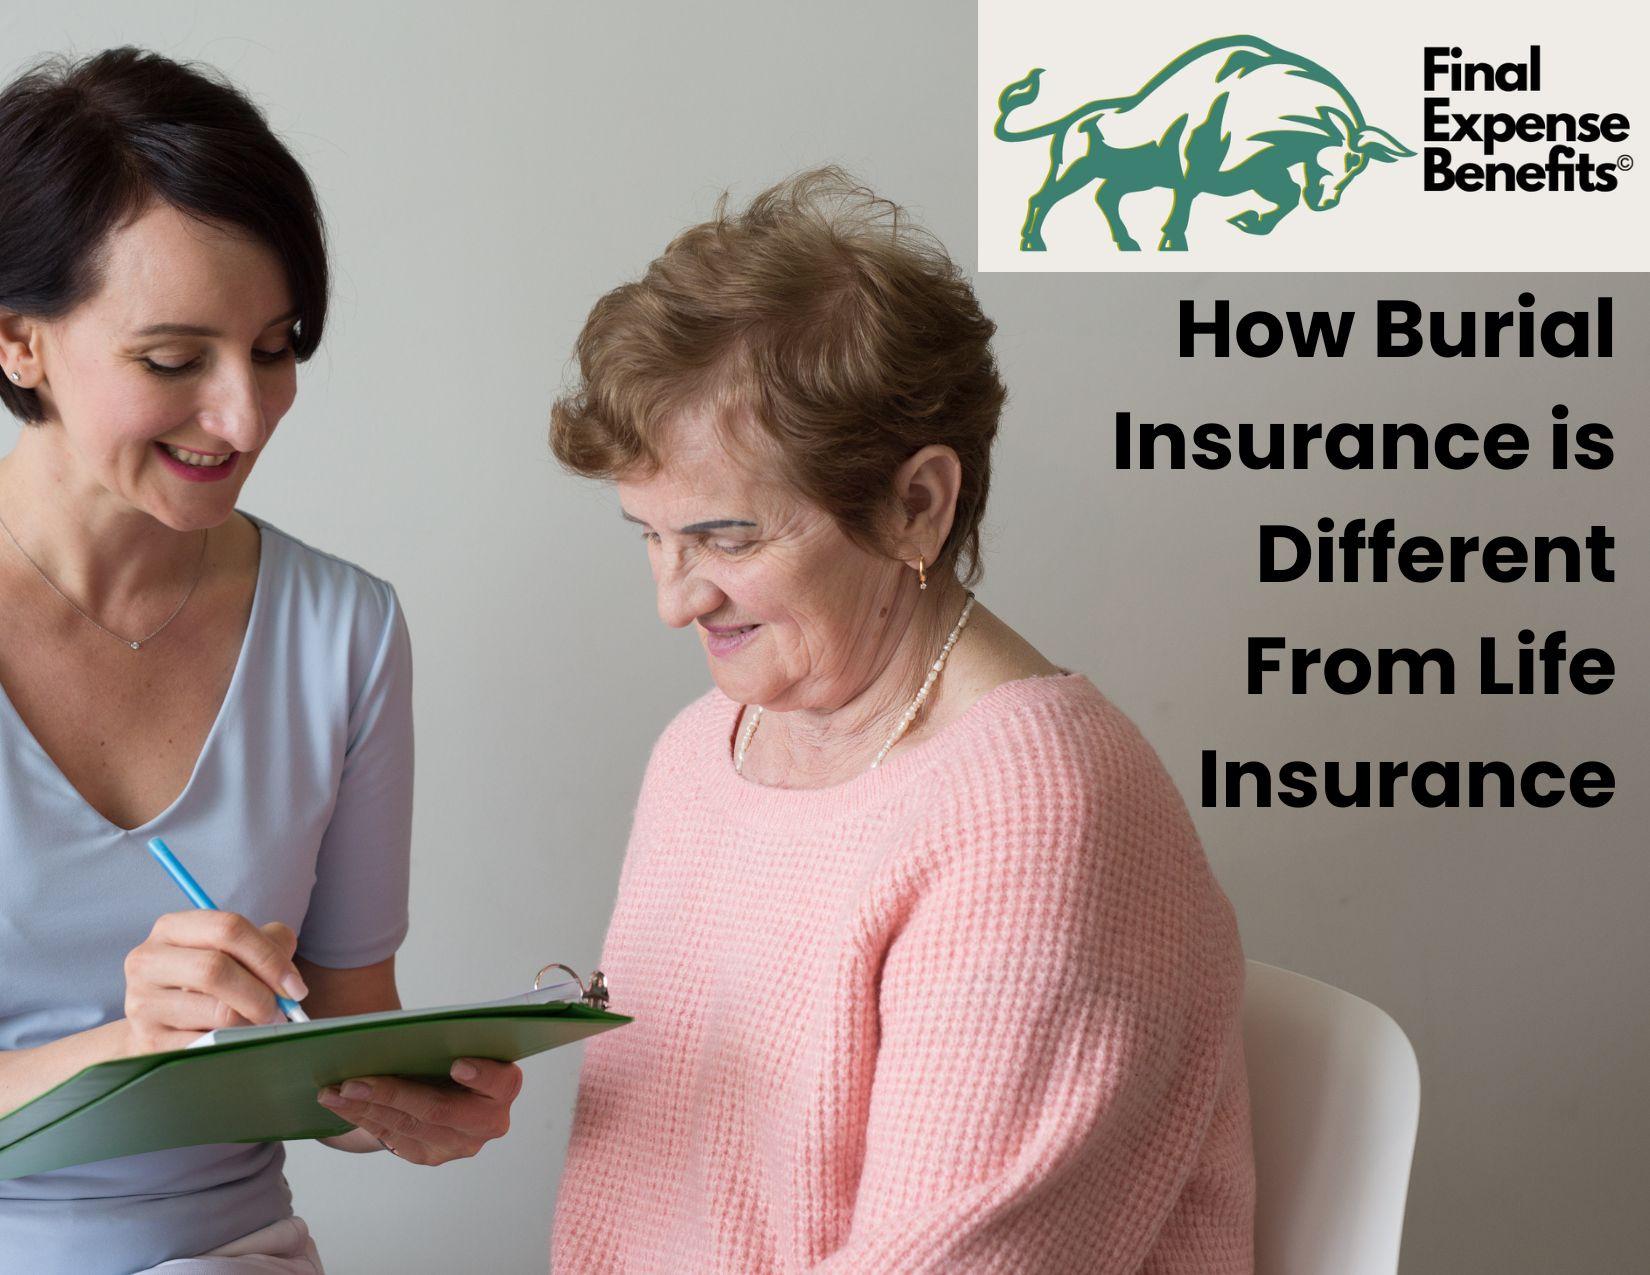 Two women having a conversation. The woman on the left has a clipboard and looks to be explaining something to the woman on the right. The Final Expense Benefits logo is on the top right of the image with the words "How Burial Insurance is Different From Life Insurance" under the logo.